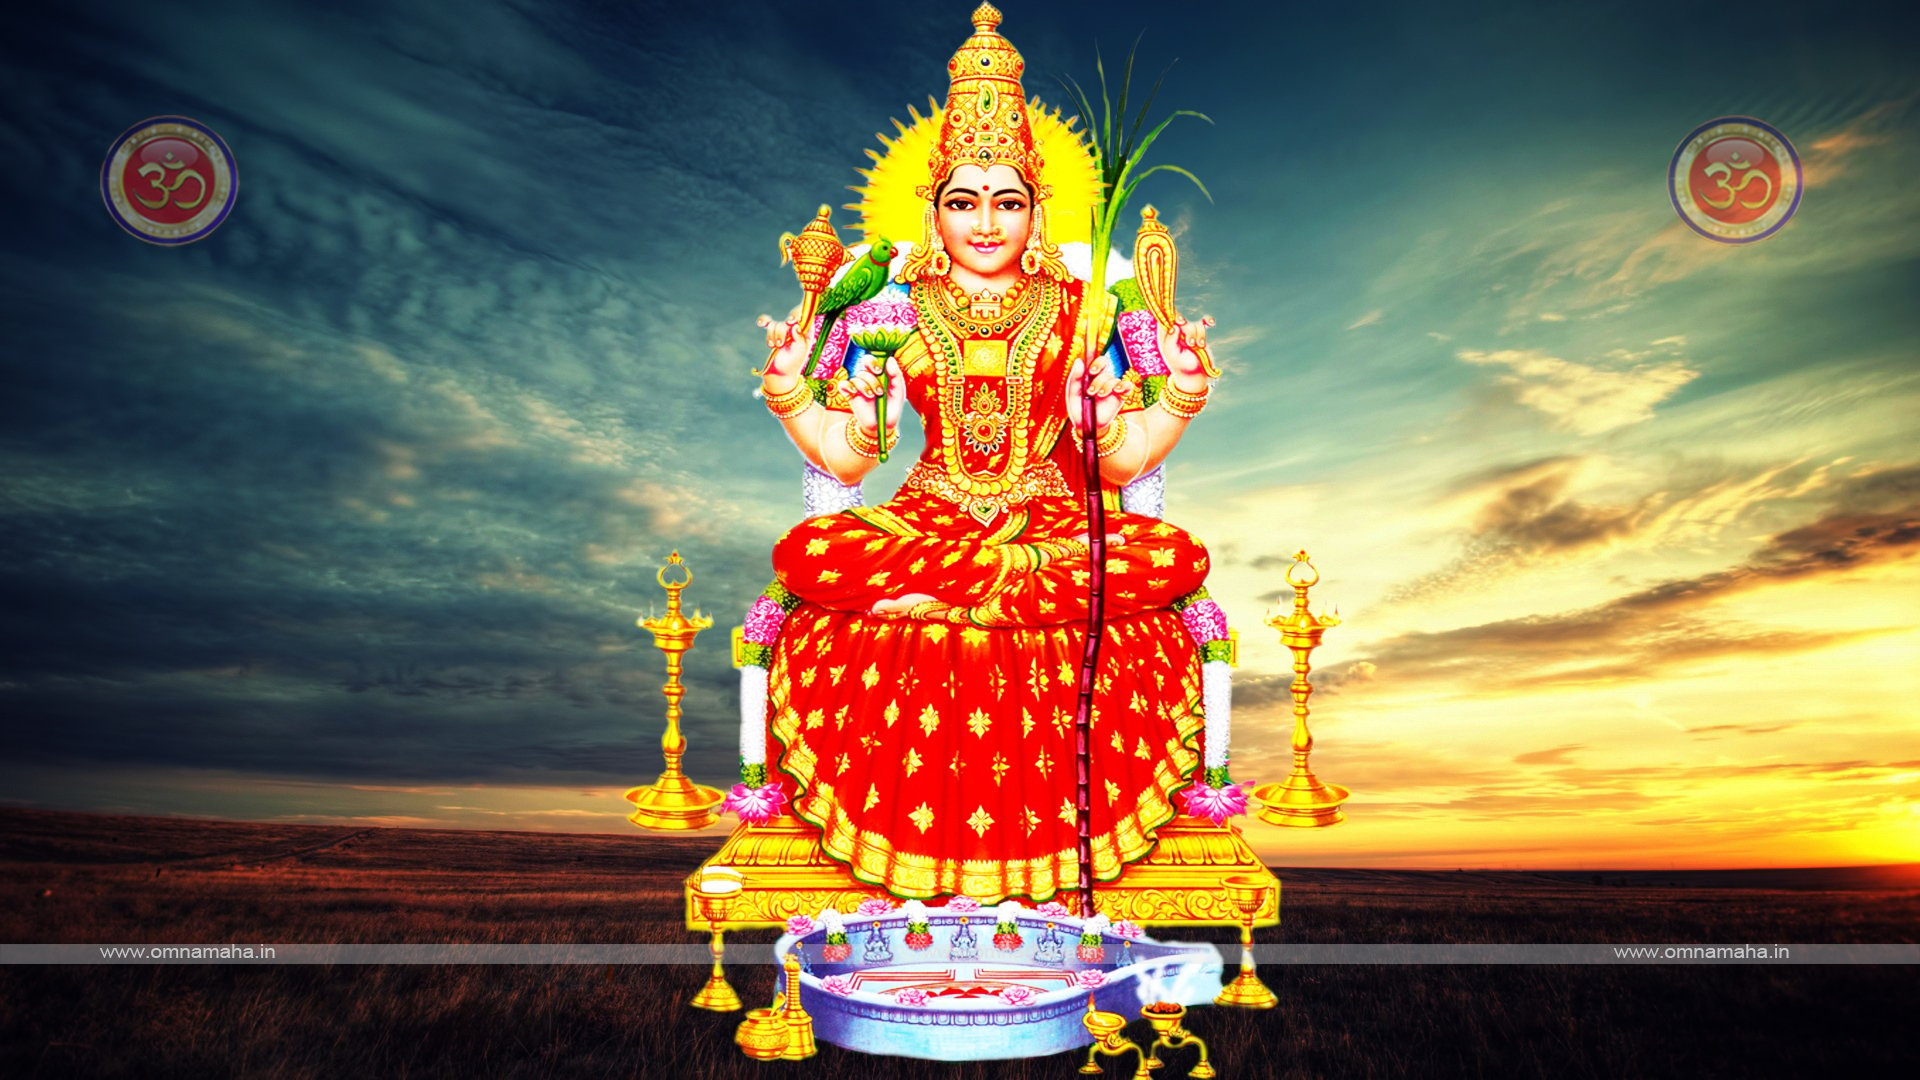 Incredible Compilation of over 999 Lalitha Devi Images in Full 4K